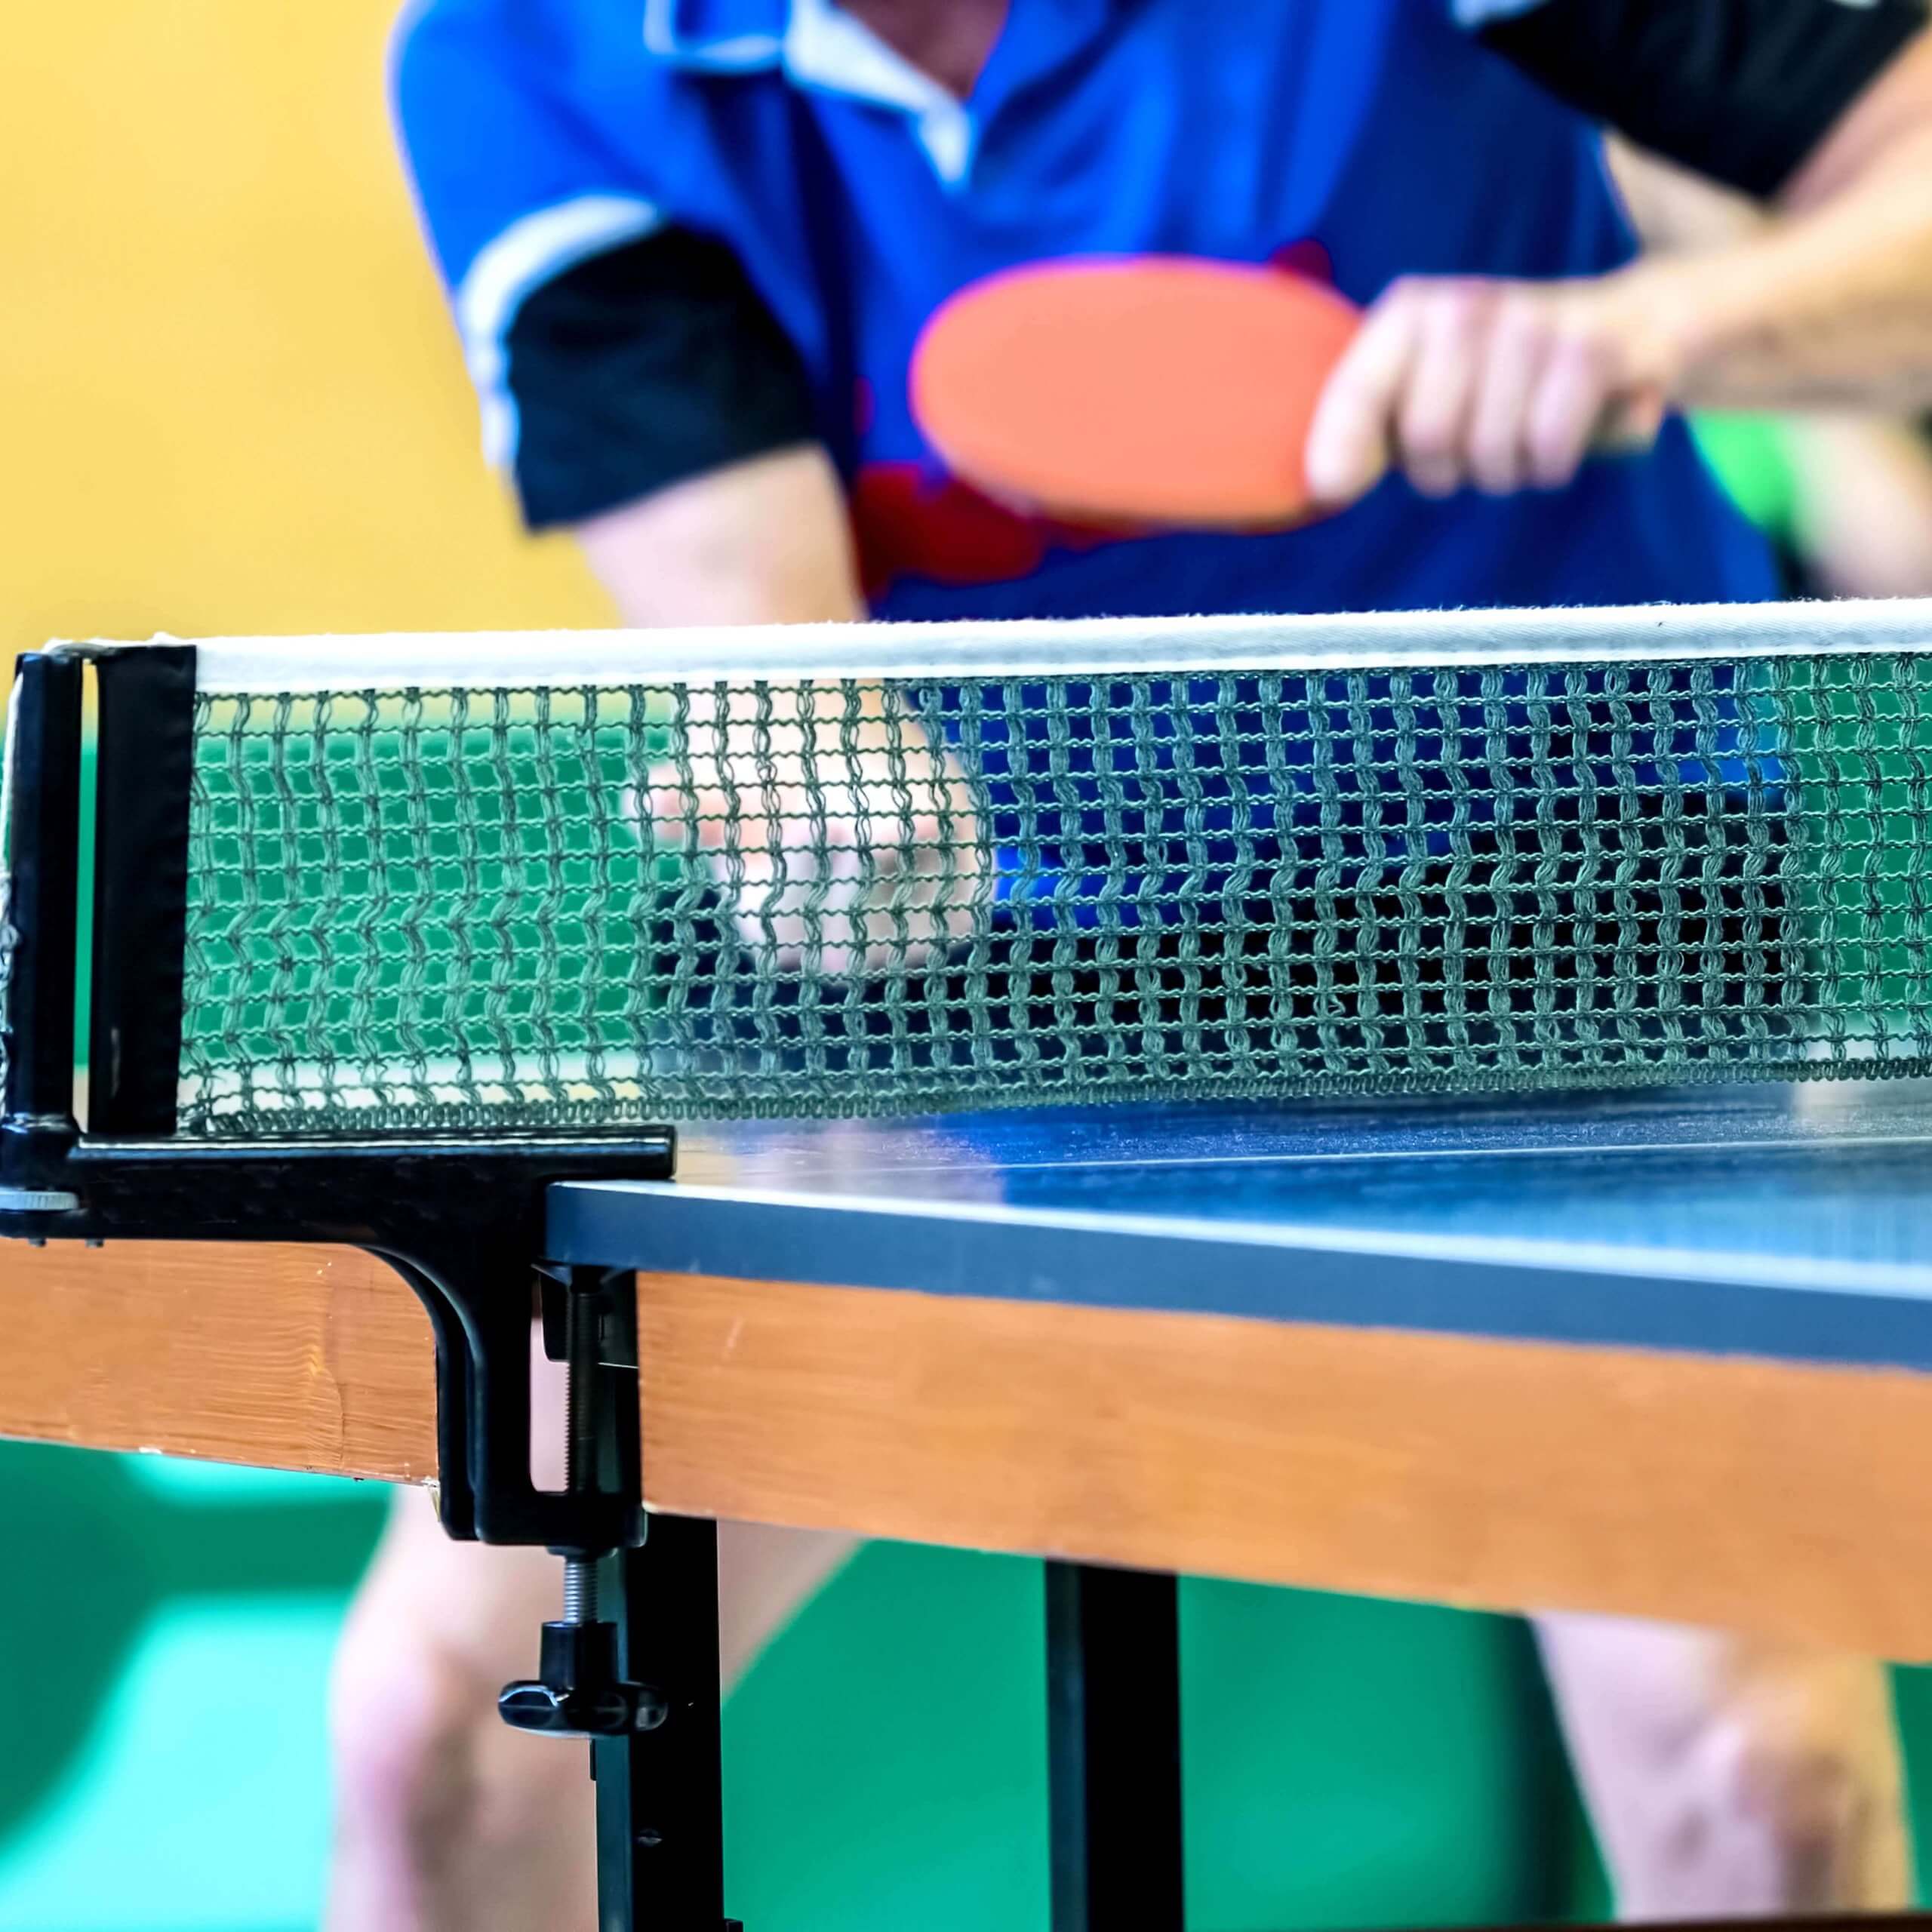 Focused on the net, an out of focused player is in mid shot at a table tennis table.